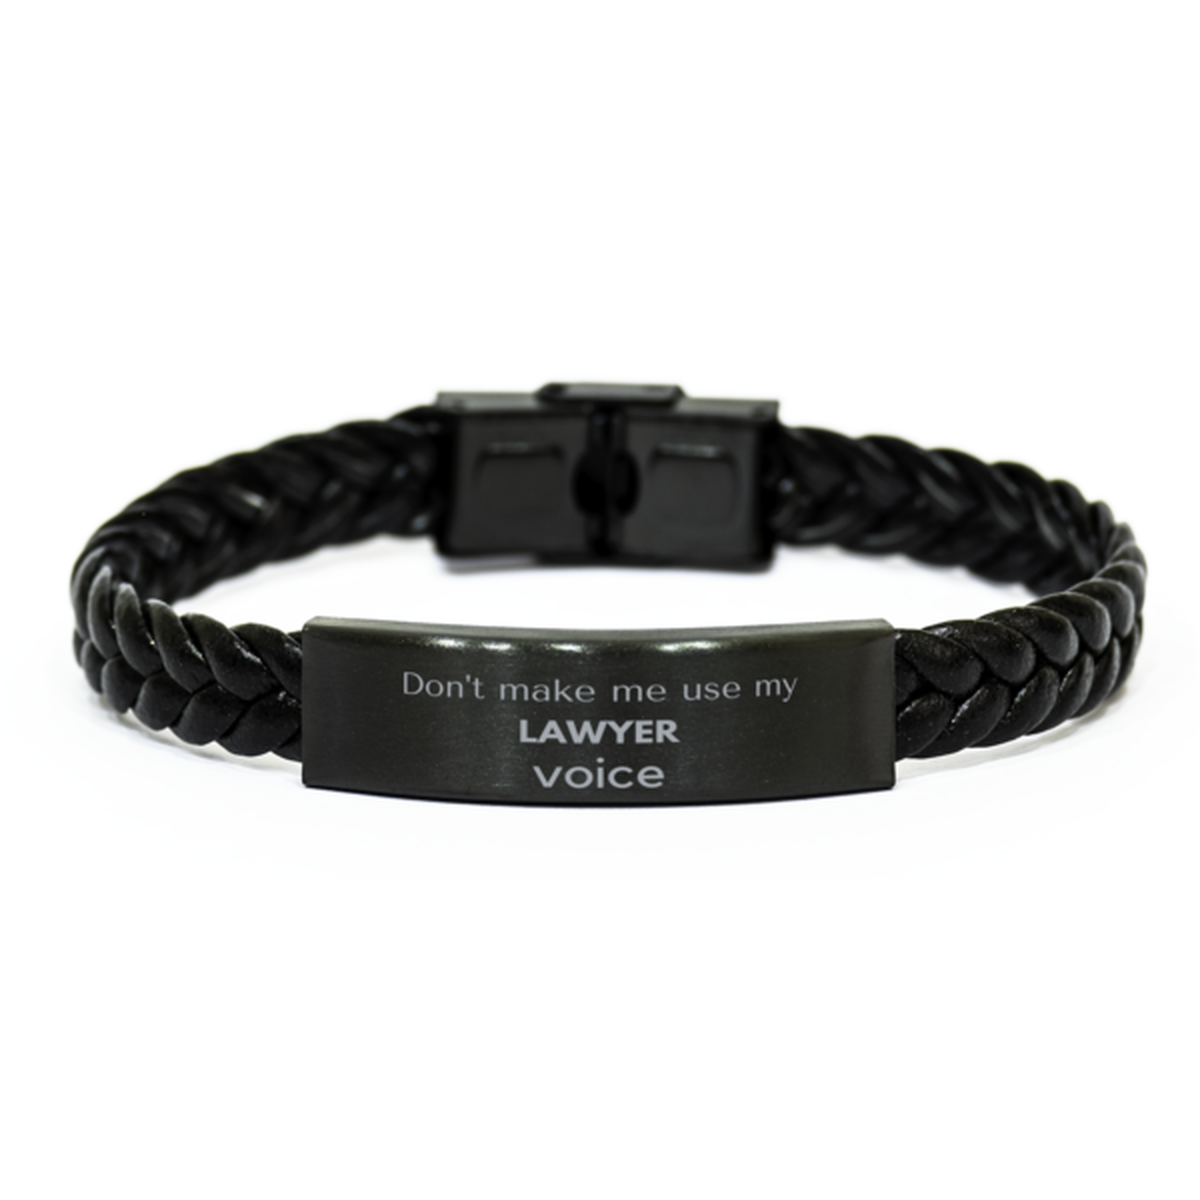 Don't make me use my Lawyer voice, Sarcasm Lawyer Gifts, Christmas Lawyer Braided Leather Bracelet Birthday Unique Gifts For Lawyer Coworkers, Men, Women, Colleague, Friends